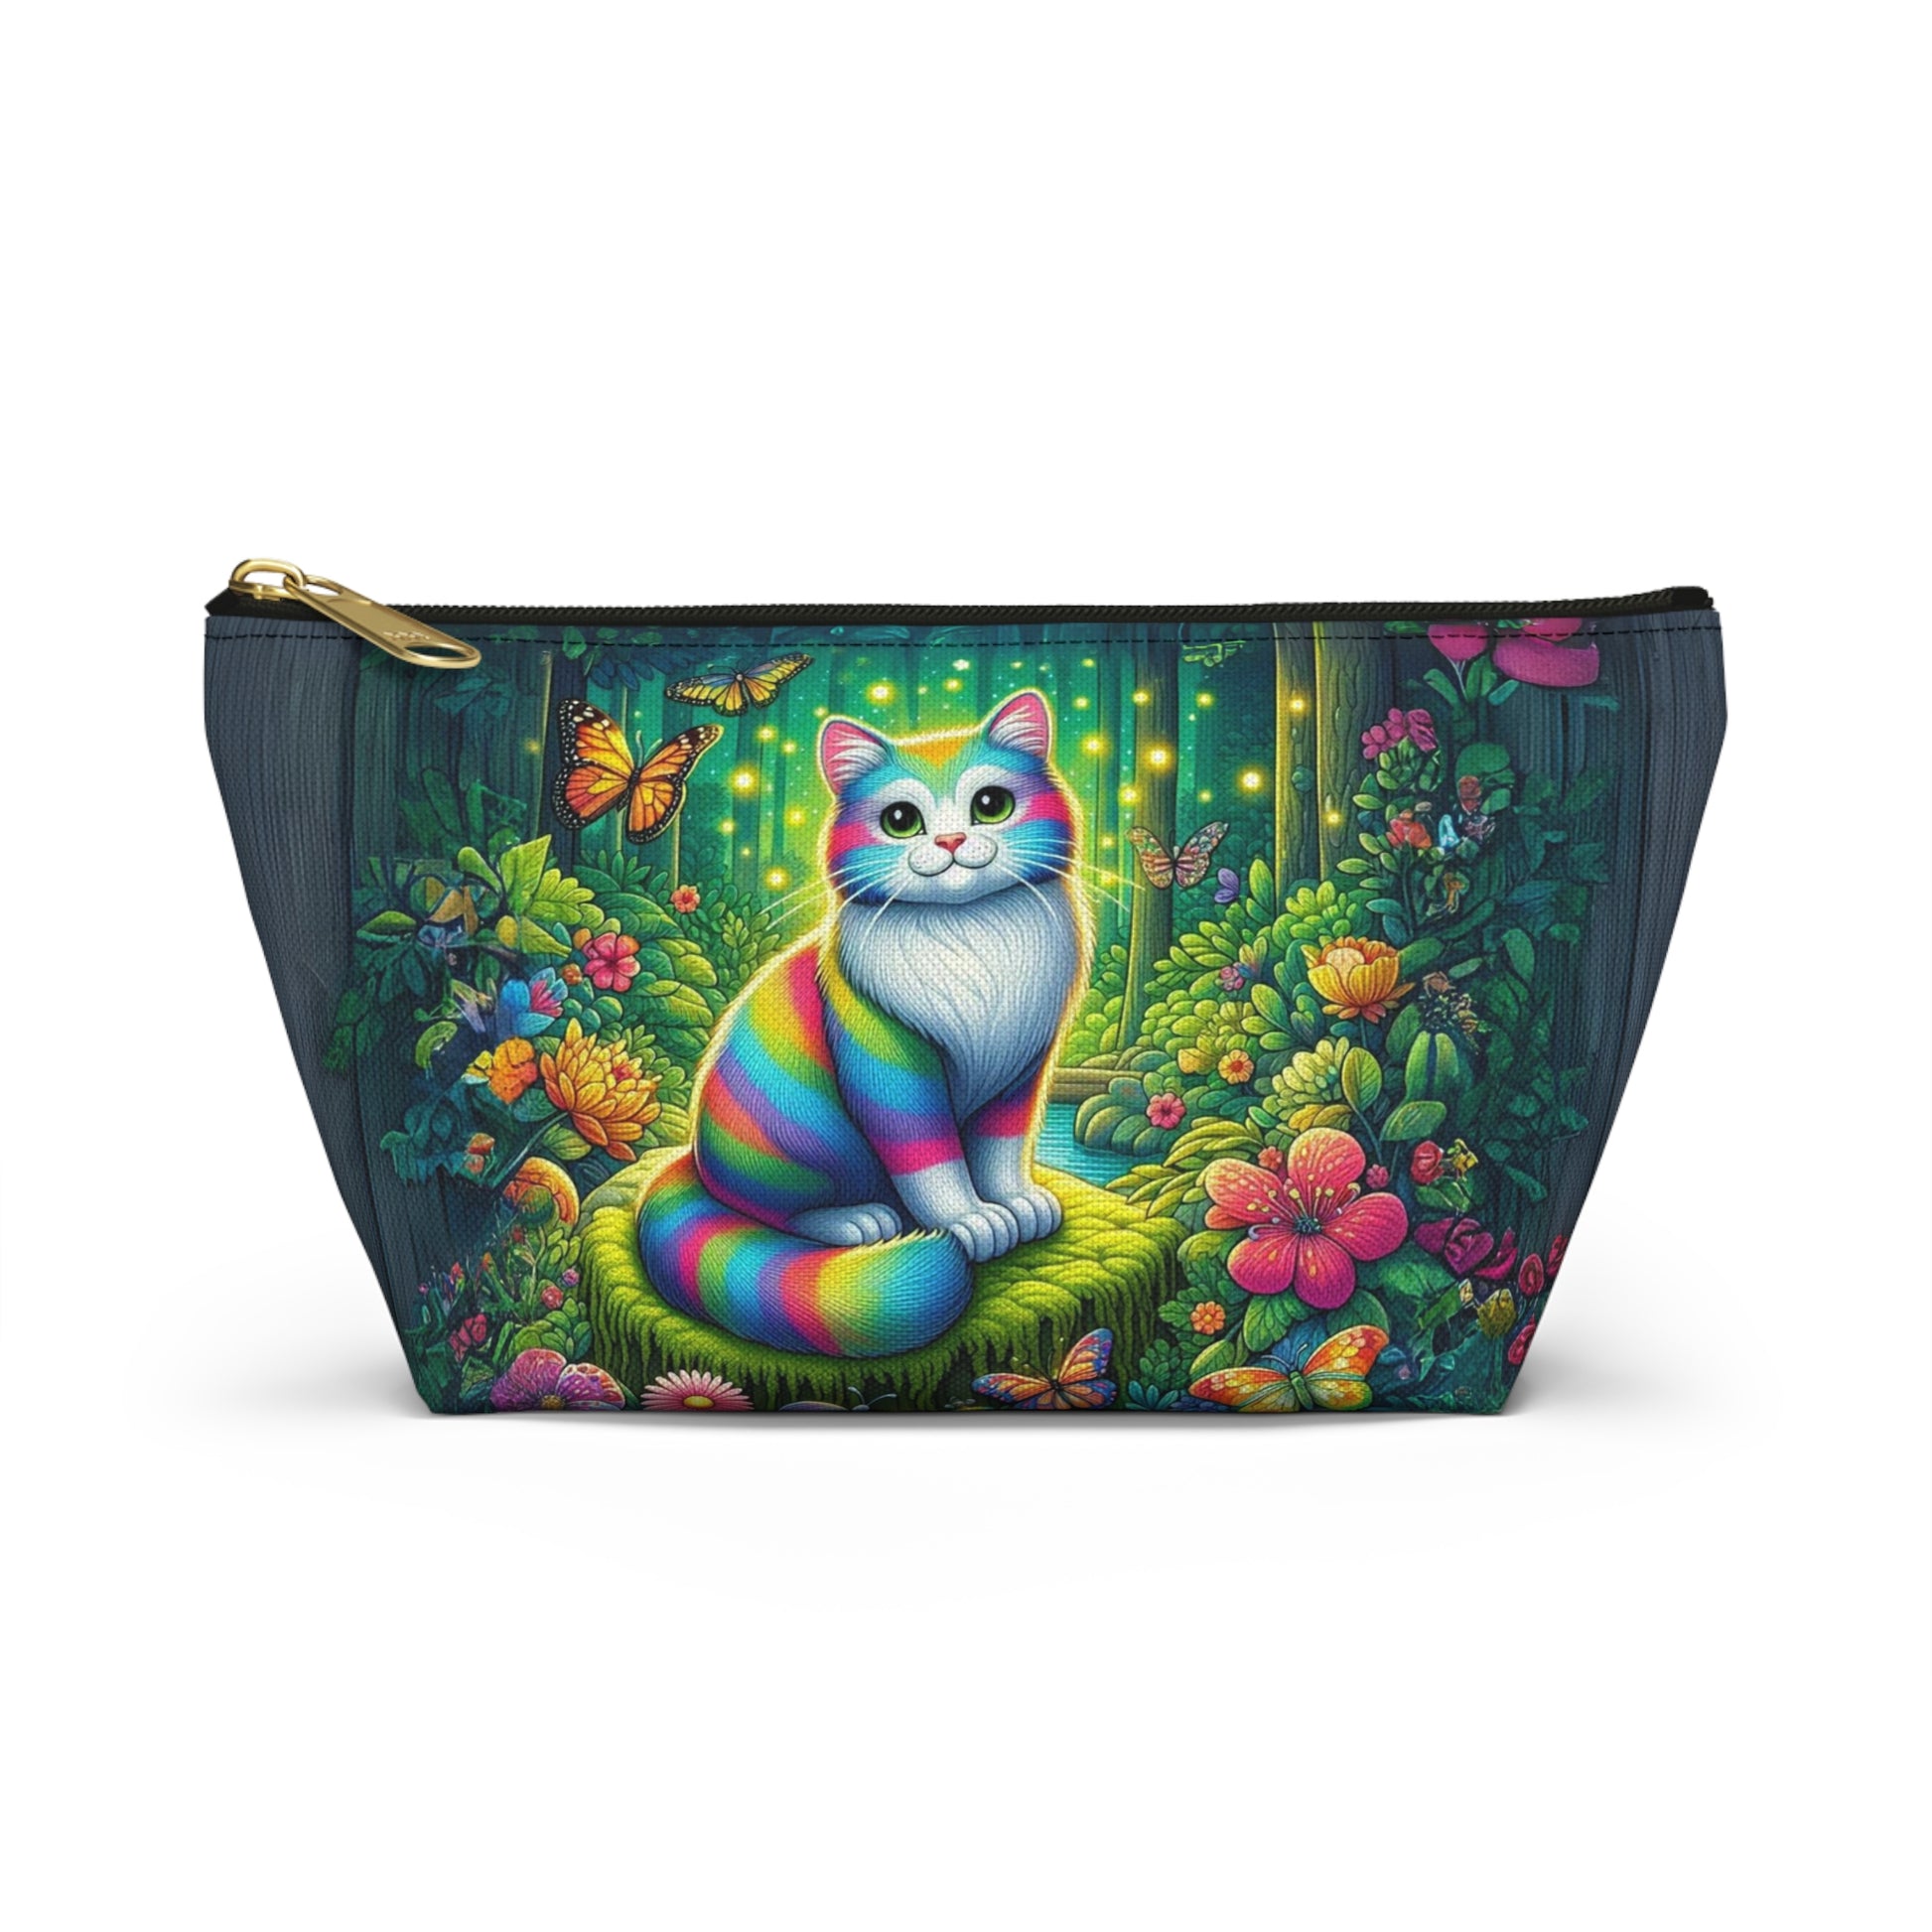 Everyday bag with T-bottom, perfect for accessories, makeup, technology or travel (Colorful cat)